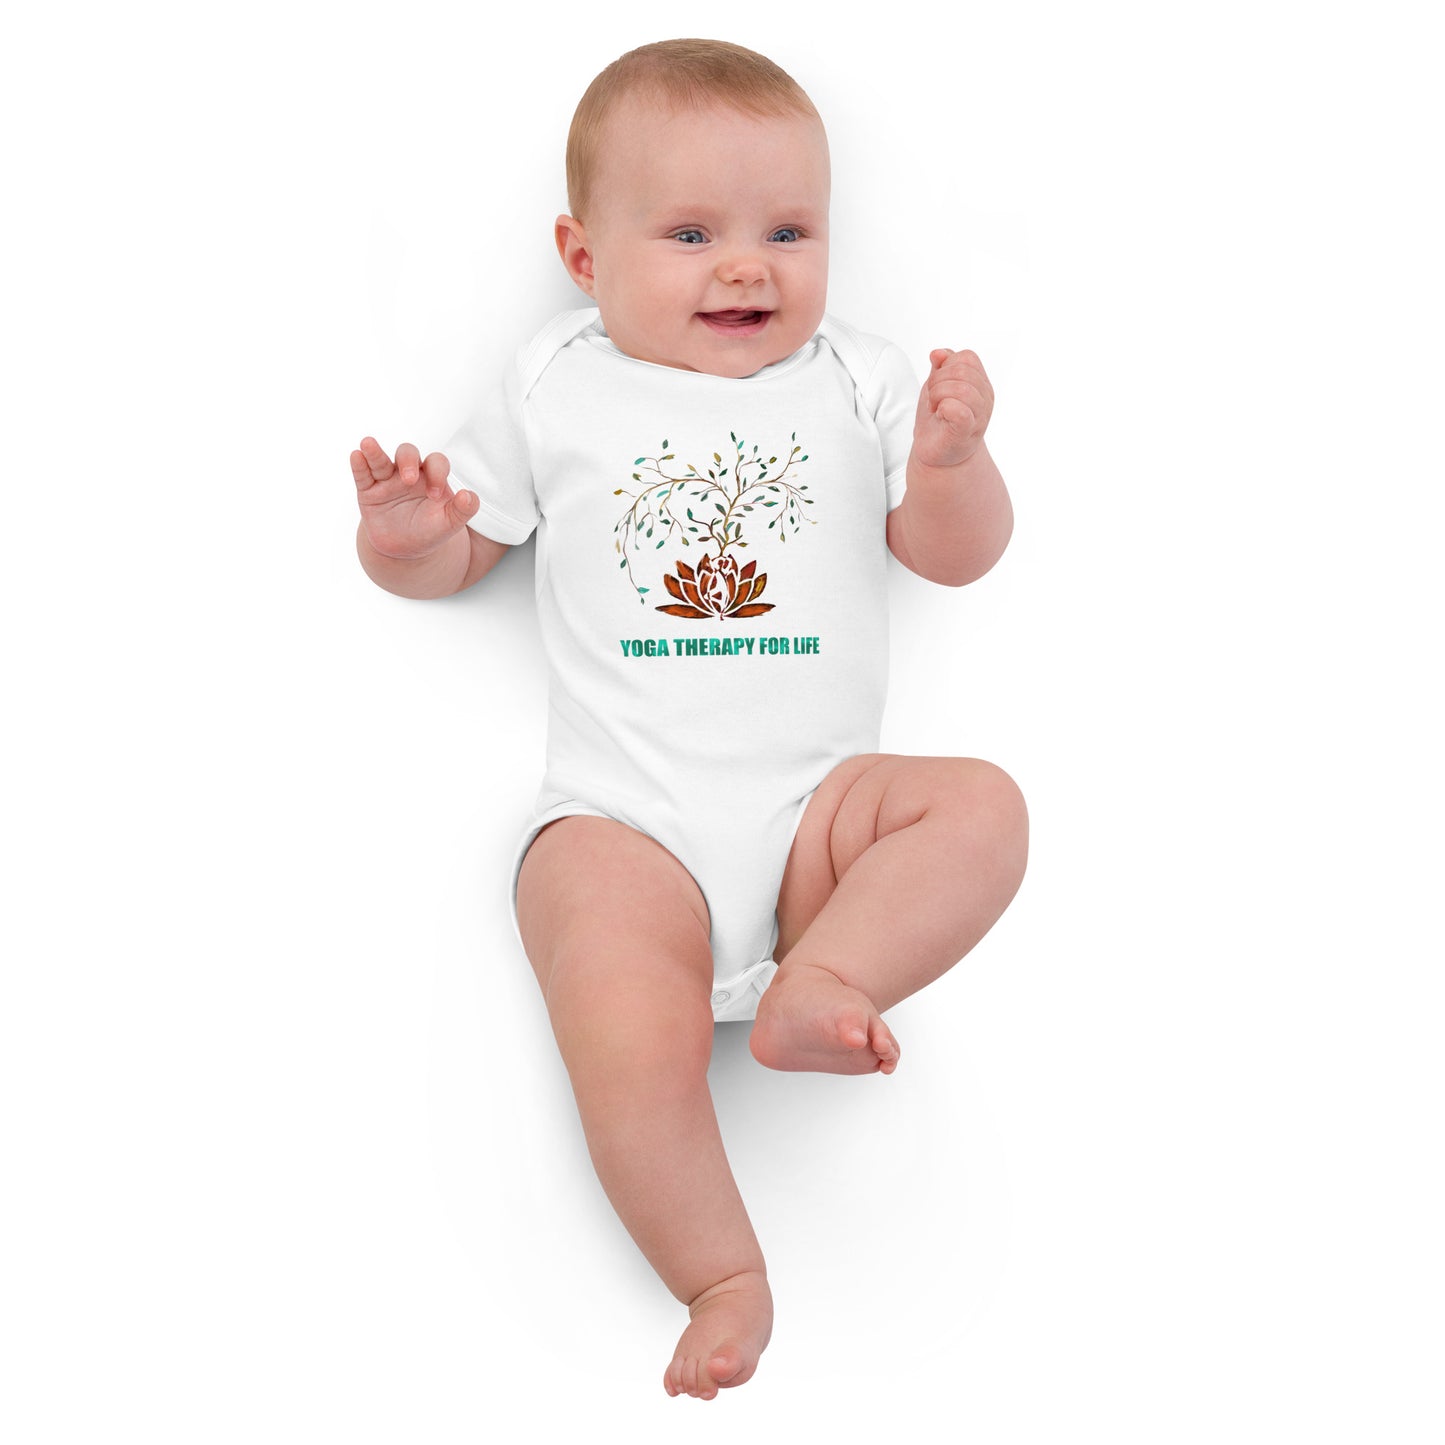 Yoga Therapy For Life Soft Organic Cotton Baby Bodysuit